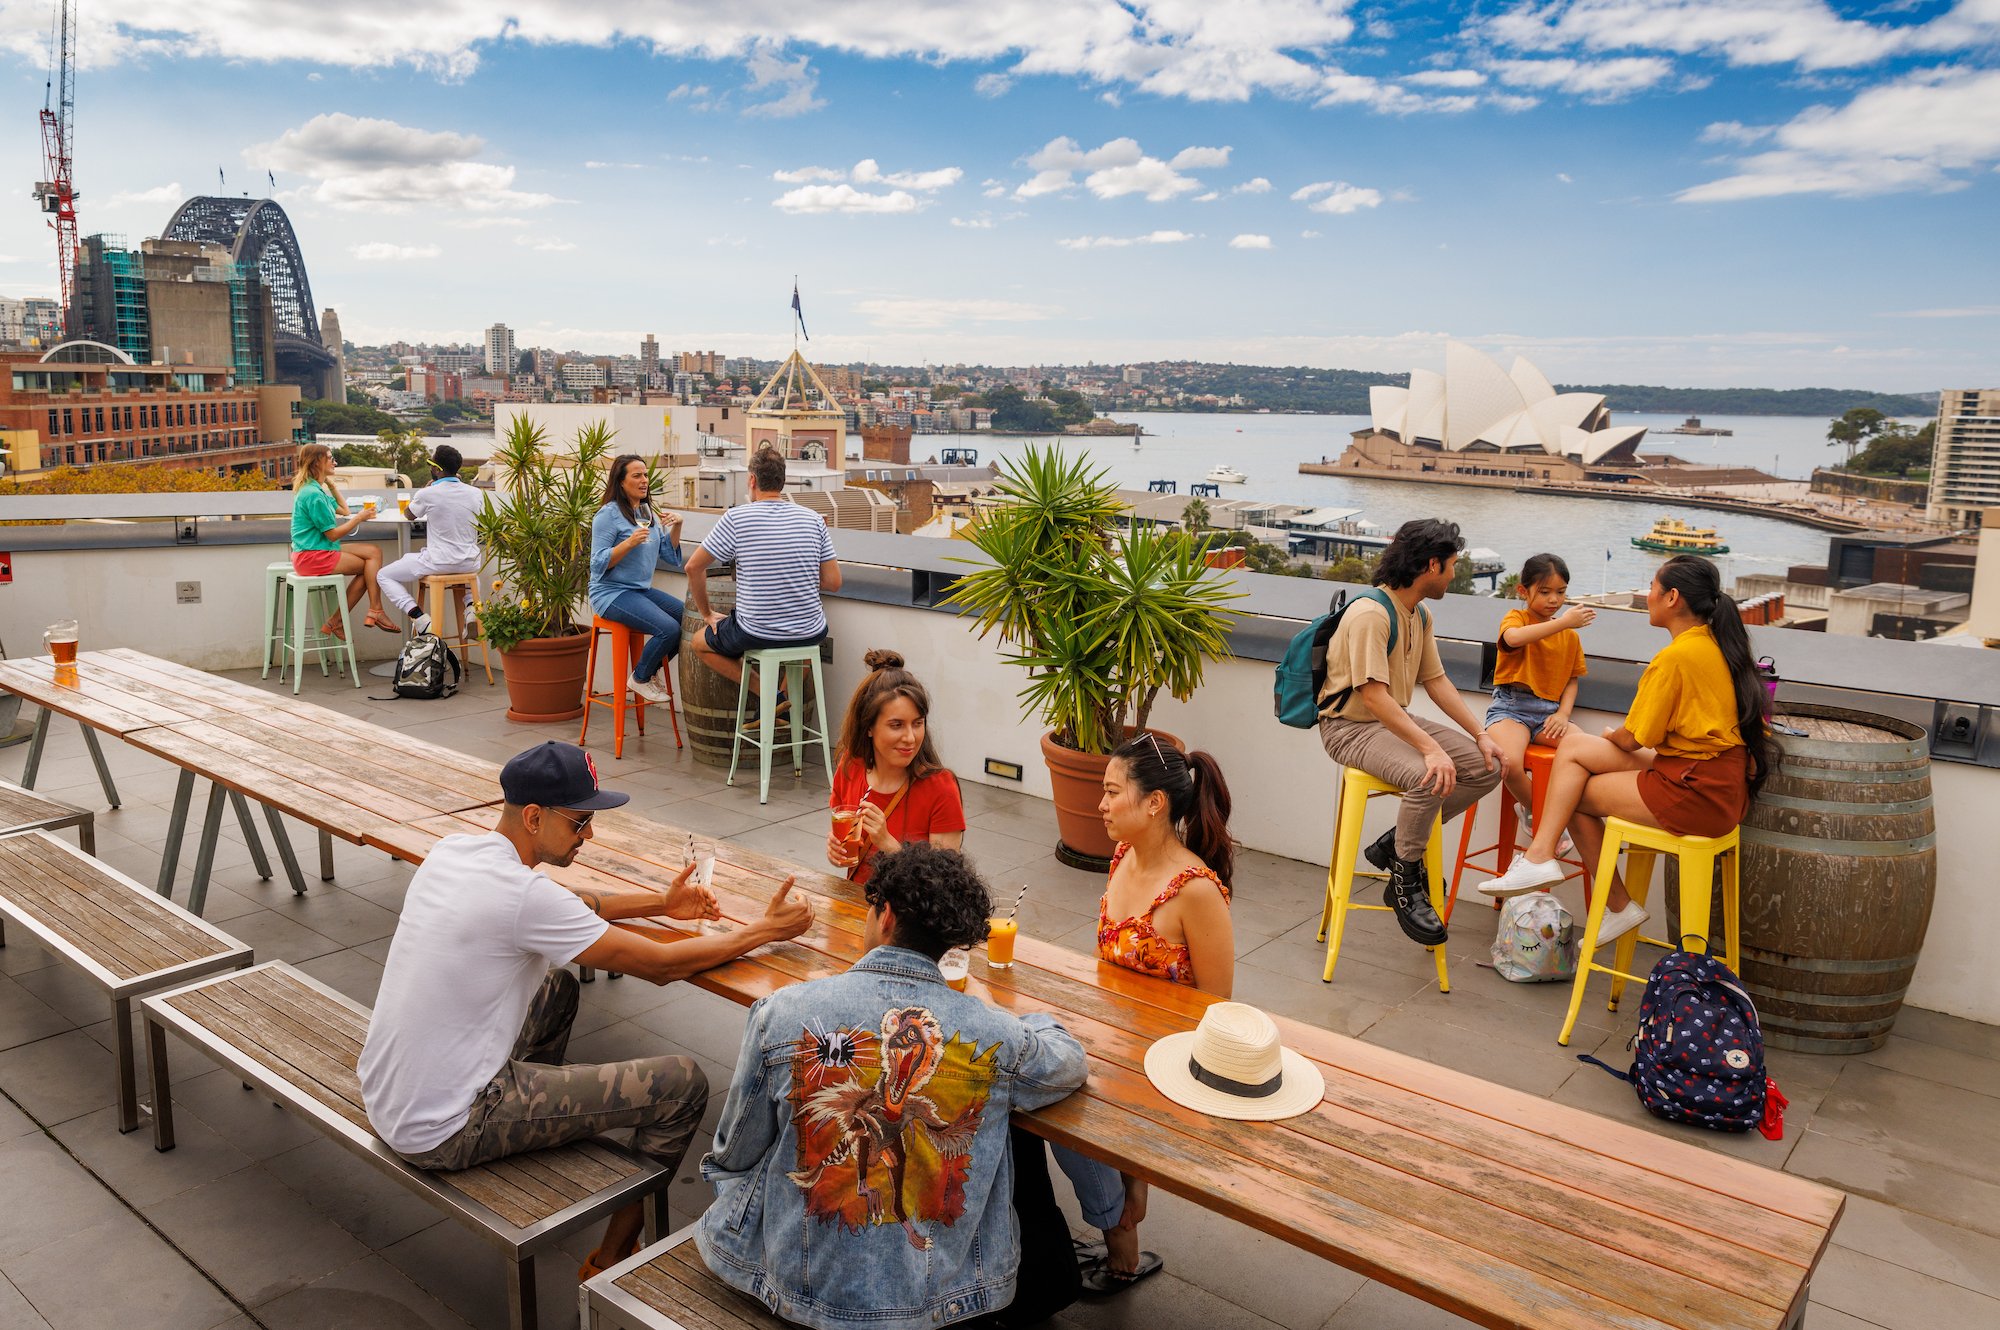 101 Free Things To Do in Sydney